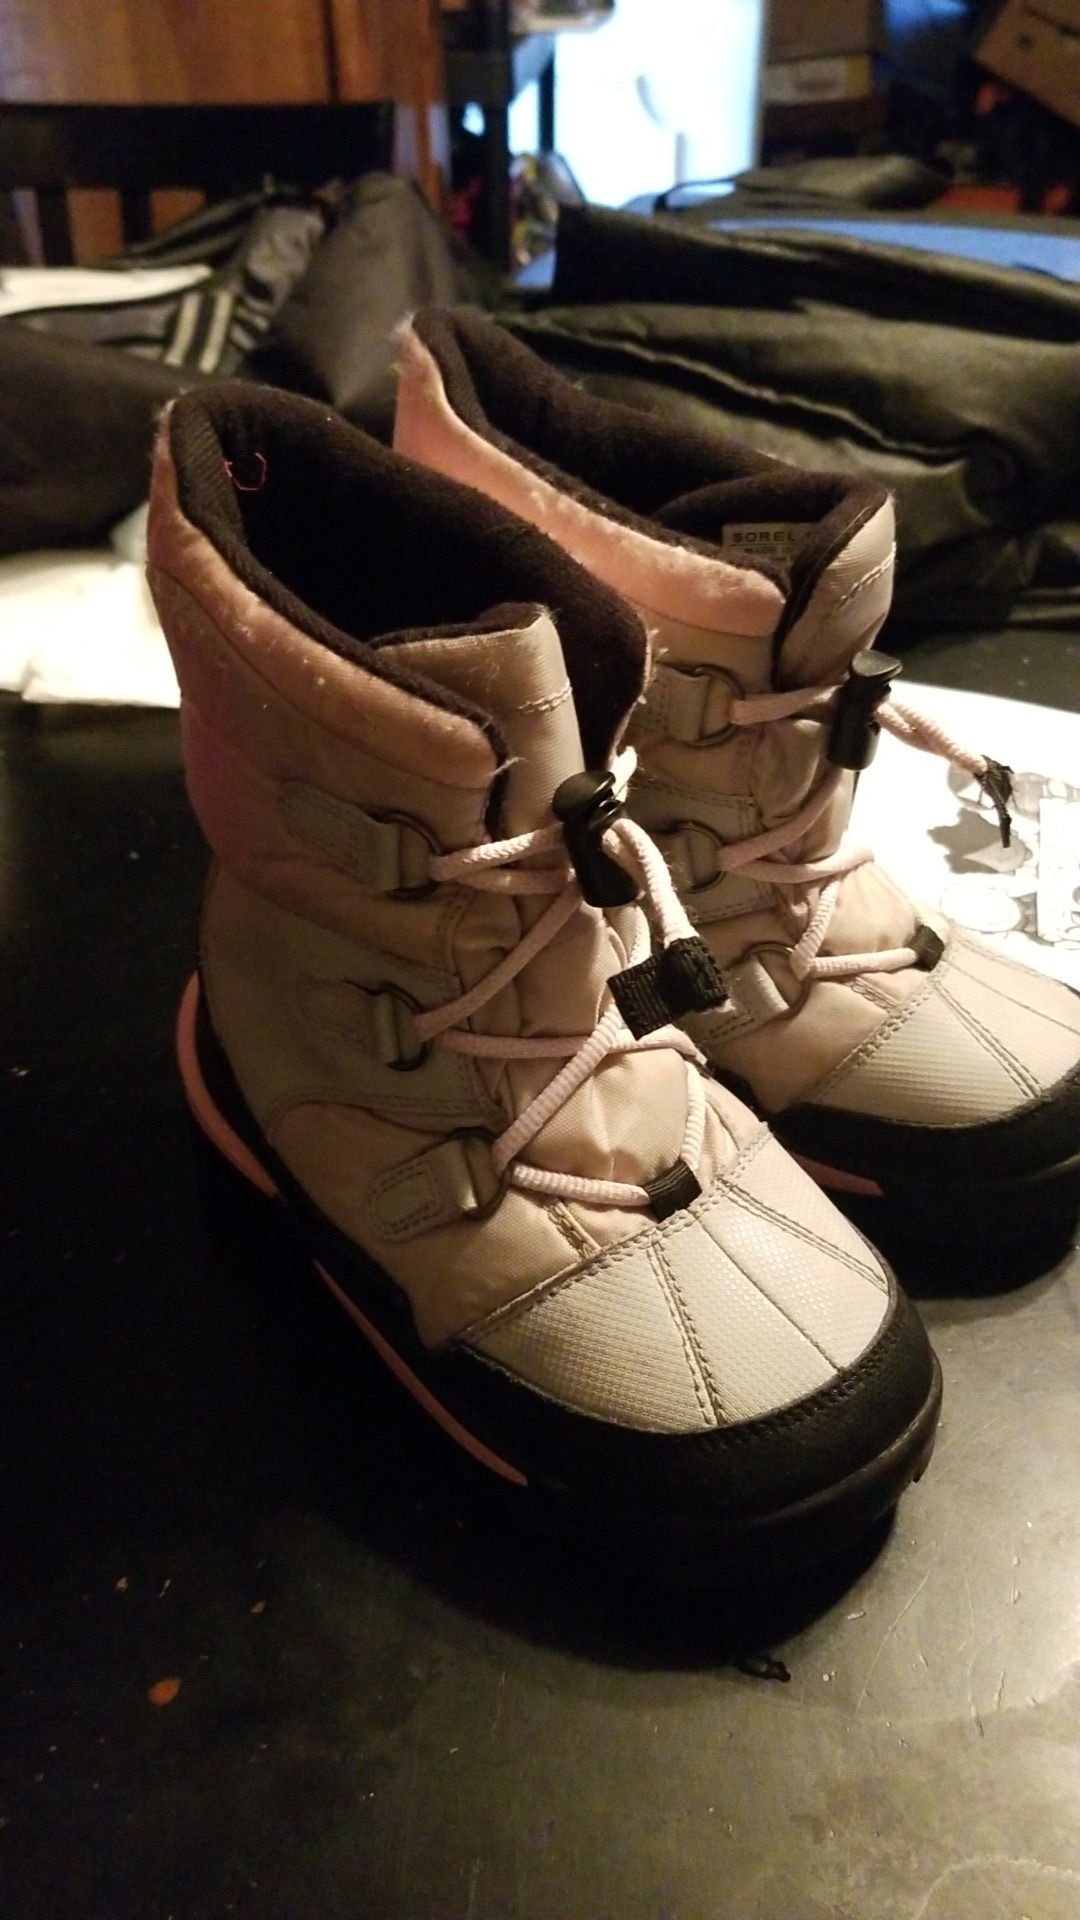 Sorely kids snow boots make an offer